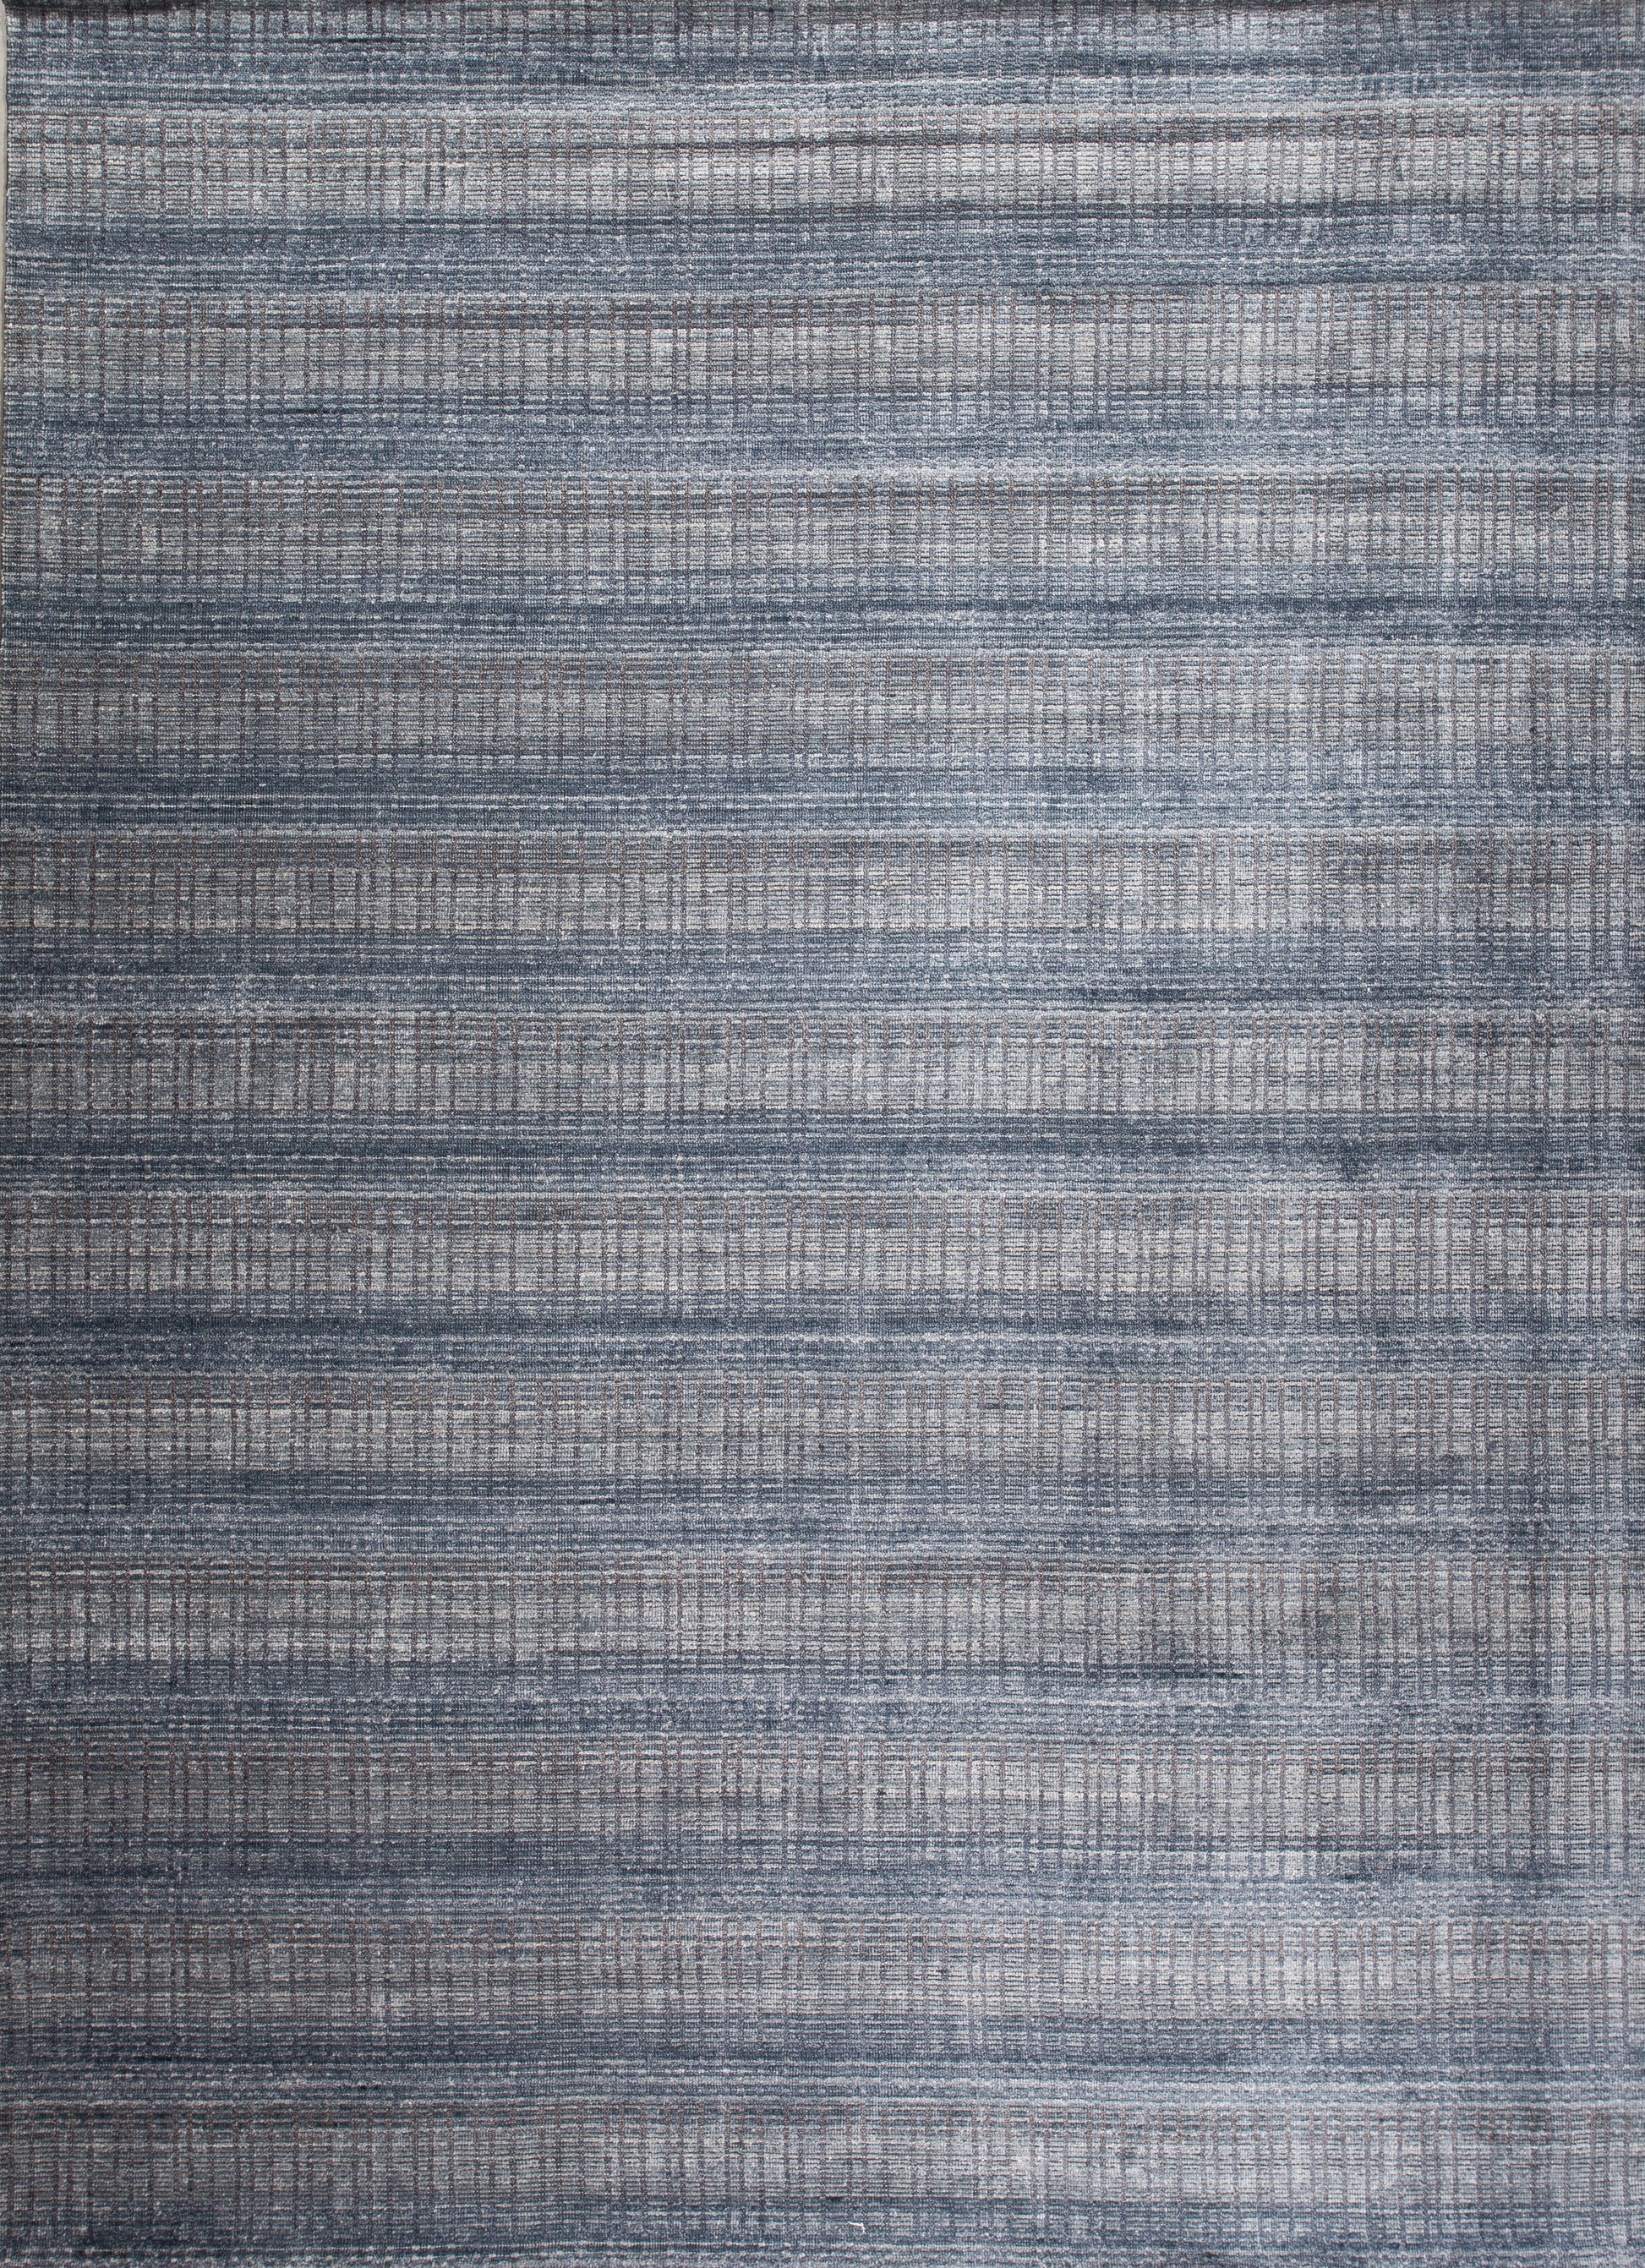 This modern youthful carpet comes with a very cool jeans pattern, and it's a nice option for a teenager room. The horizontal knitted pattern is in navy blue while vertical lines are in light gray tones. 